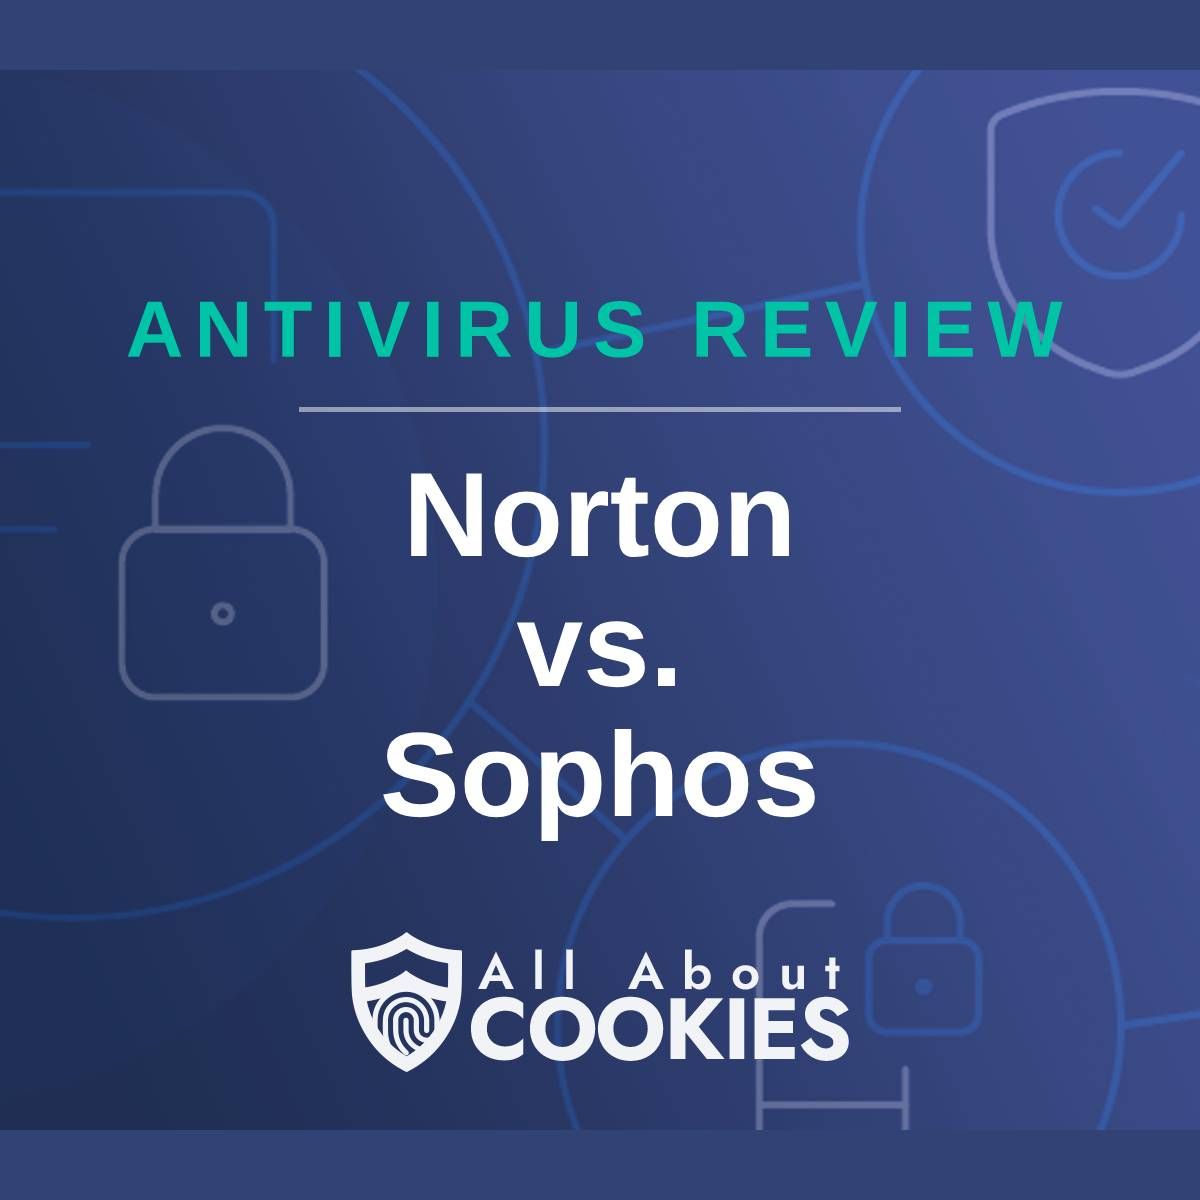 A blue background with images of locks and shields with the text &quot;Antivirus Review Norton vs. Sophos&quot; and the All About Cookies logo. 